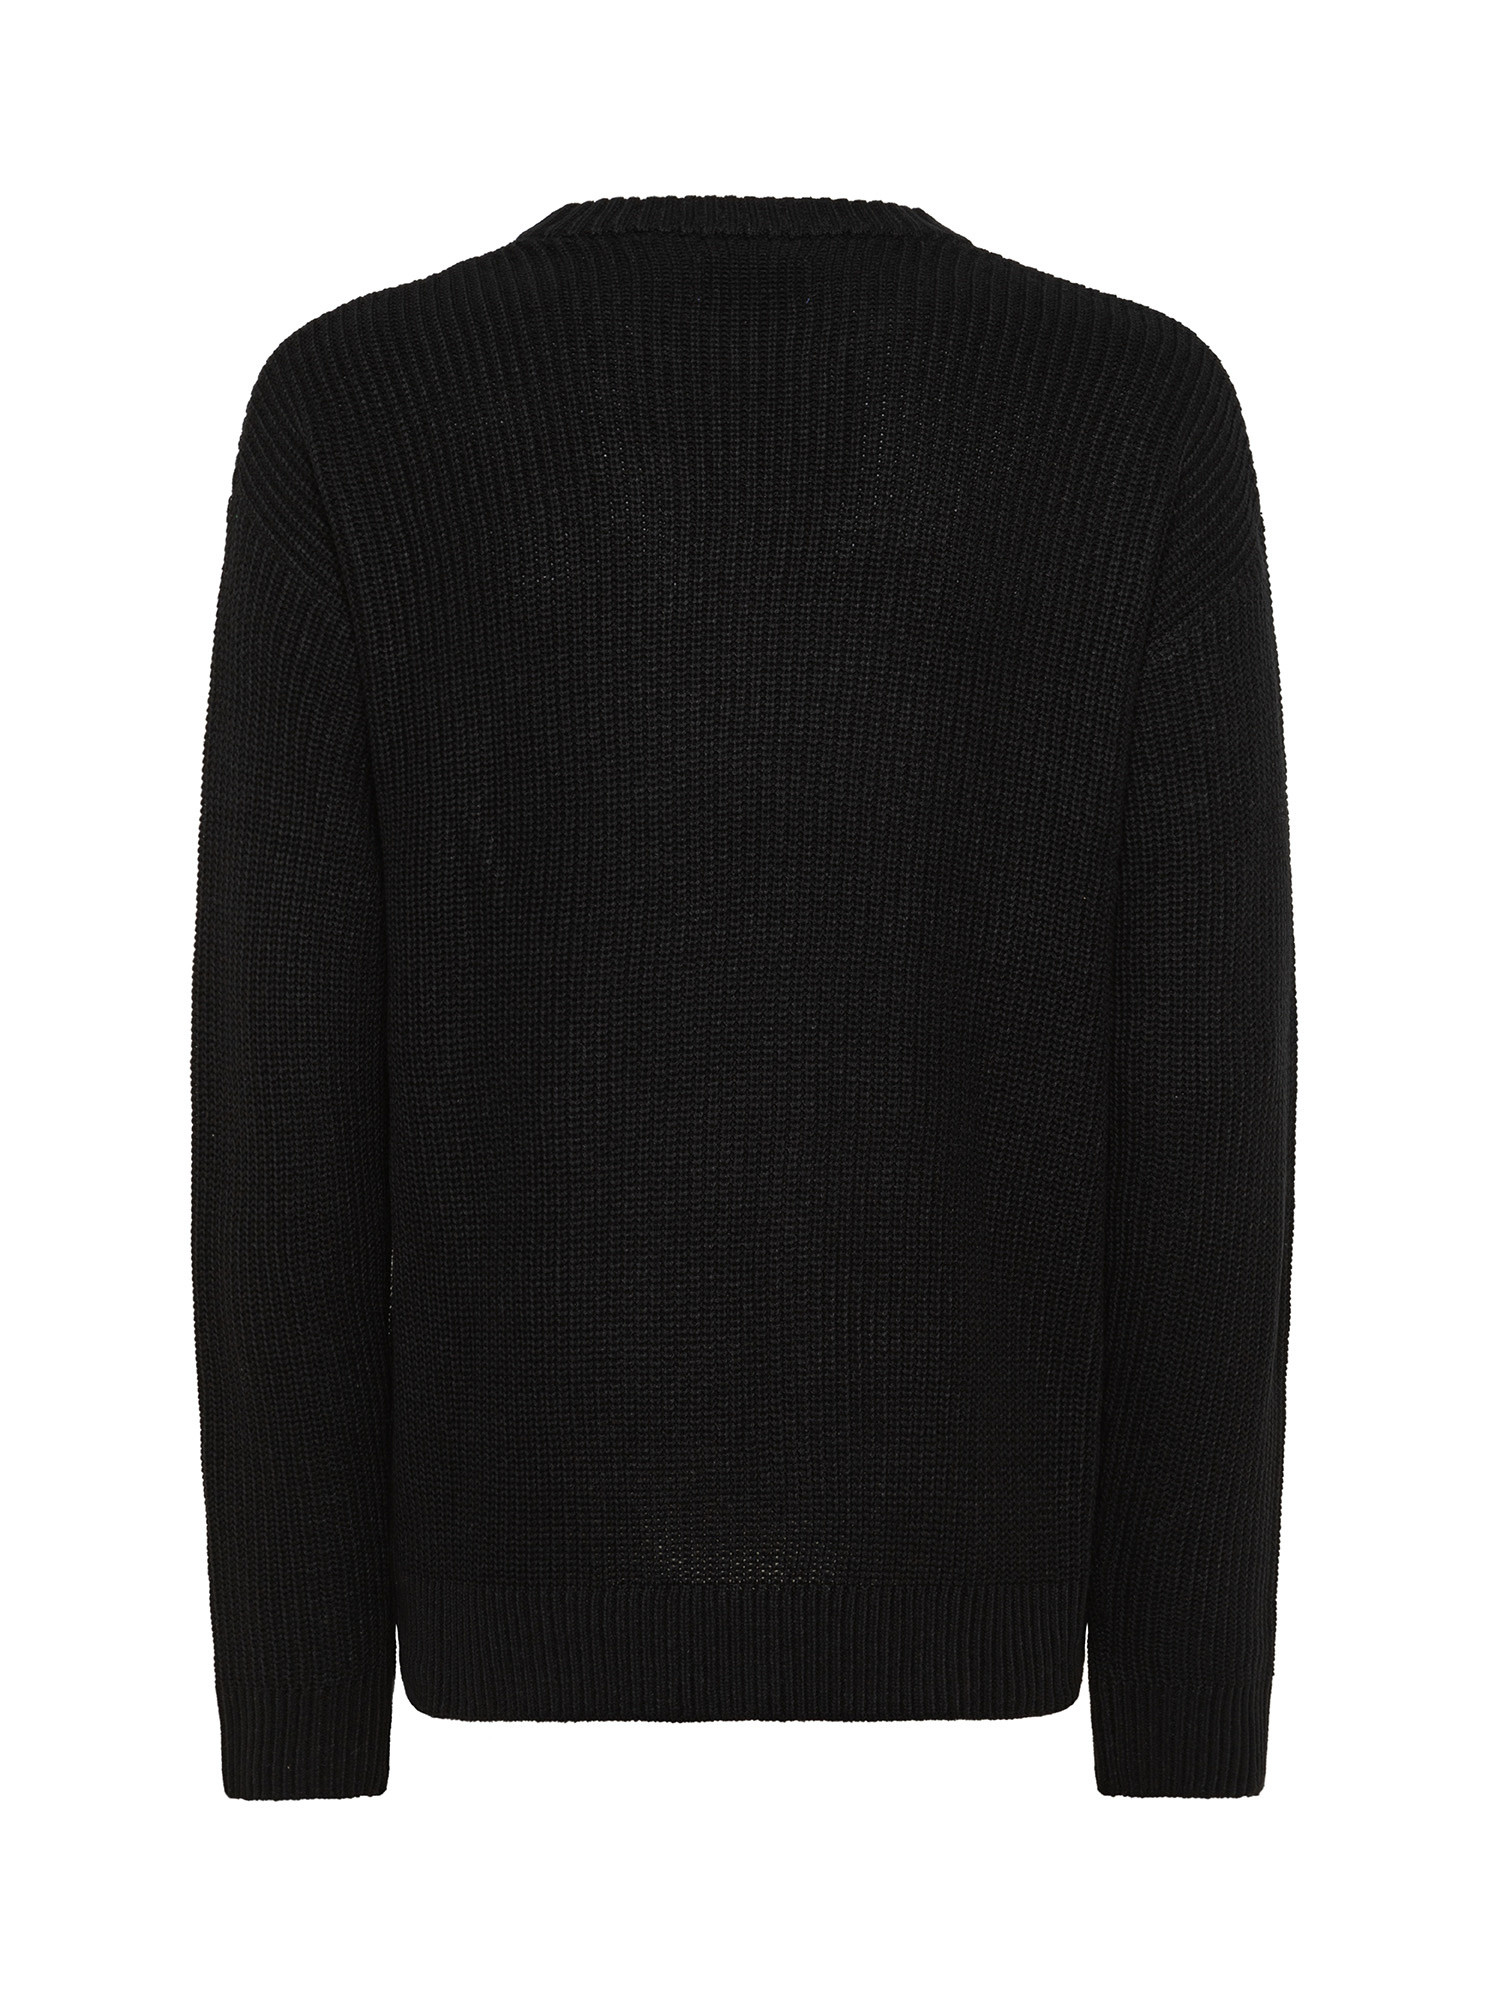 Pullover with long sleeves, Black, large image number 1